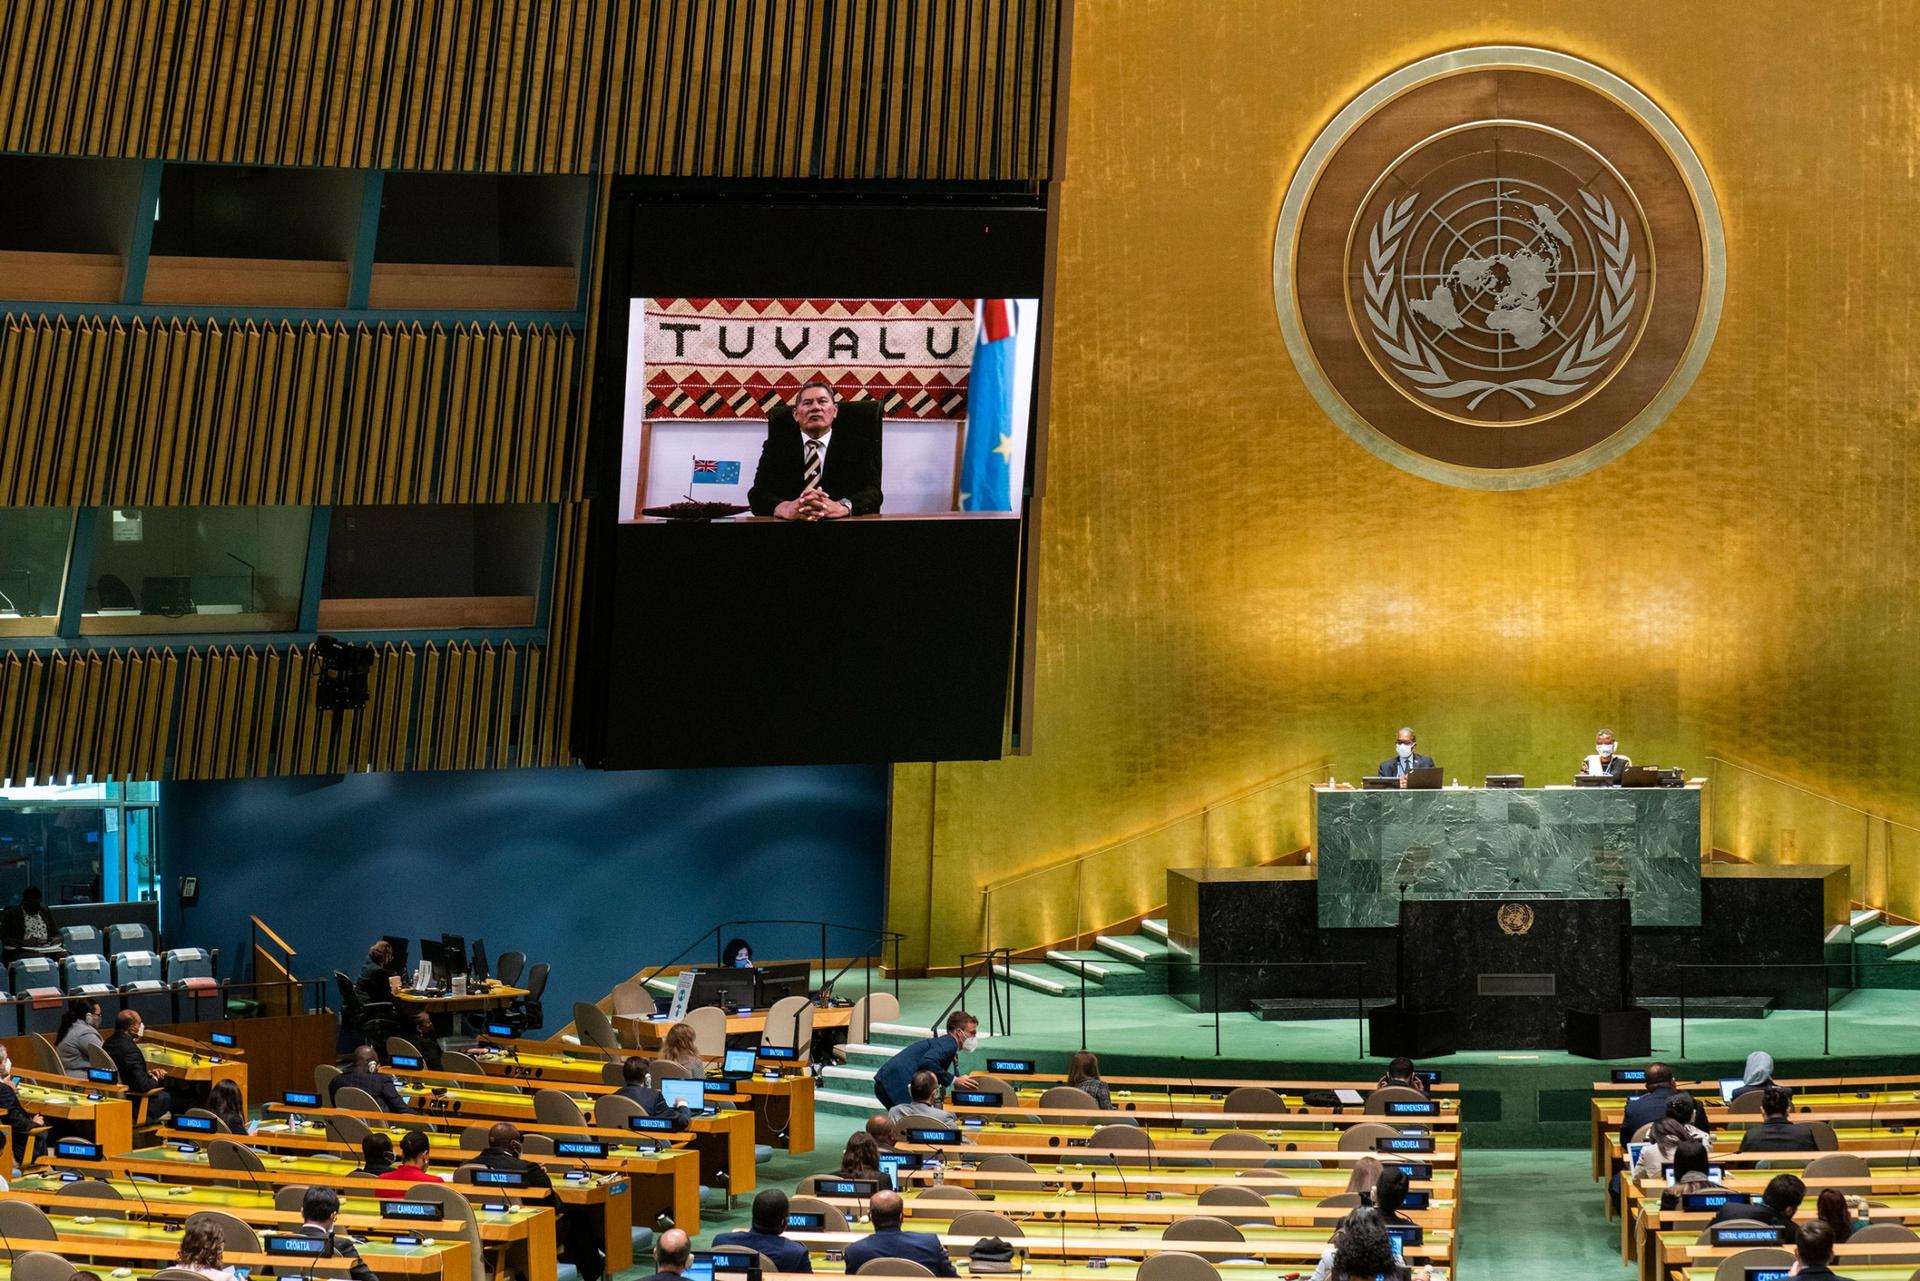 Tuvalu's Prime Minister Kausea Natano remotely addresses the 76th Session of the UN General Assembly at United Nations headquarters in New York, on Saturday, Sept. 25, 2021. 